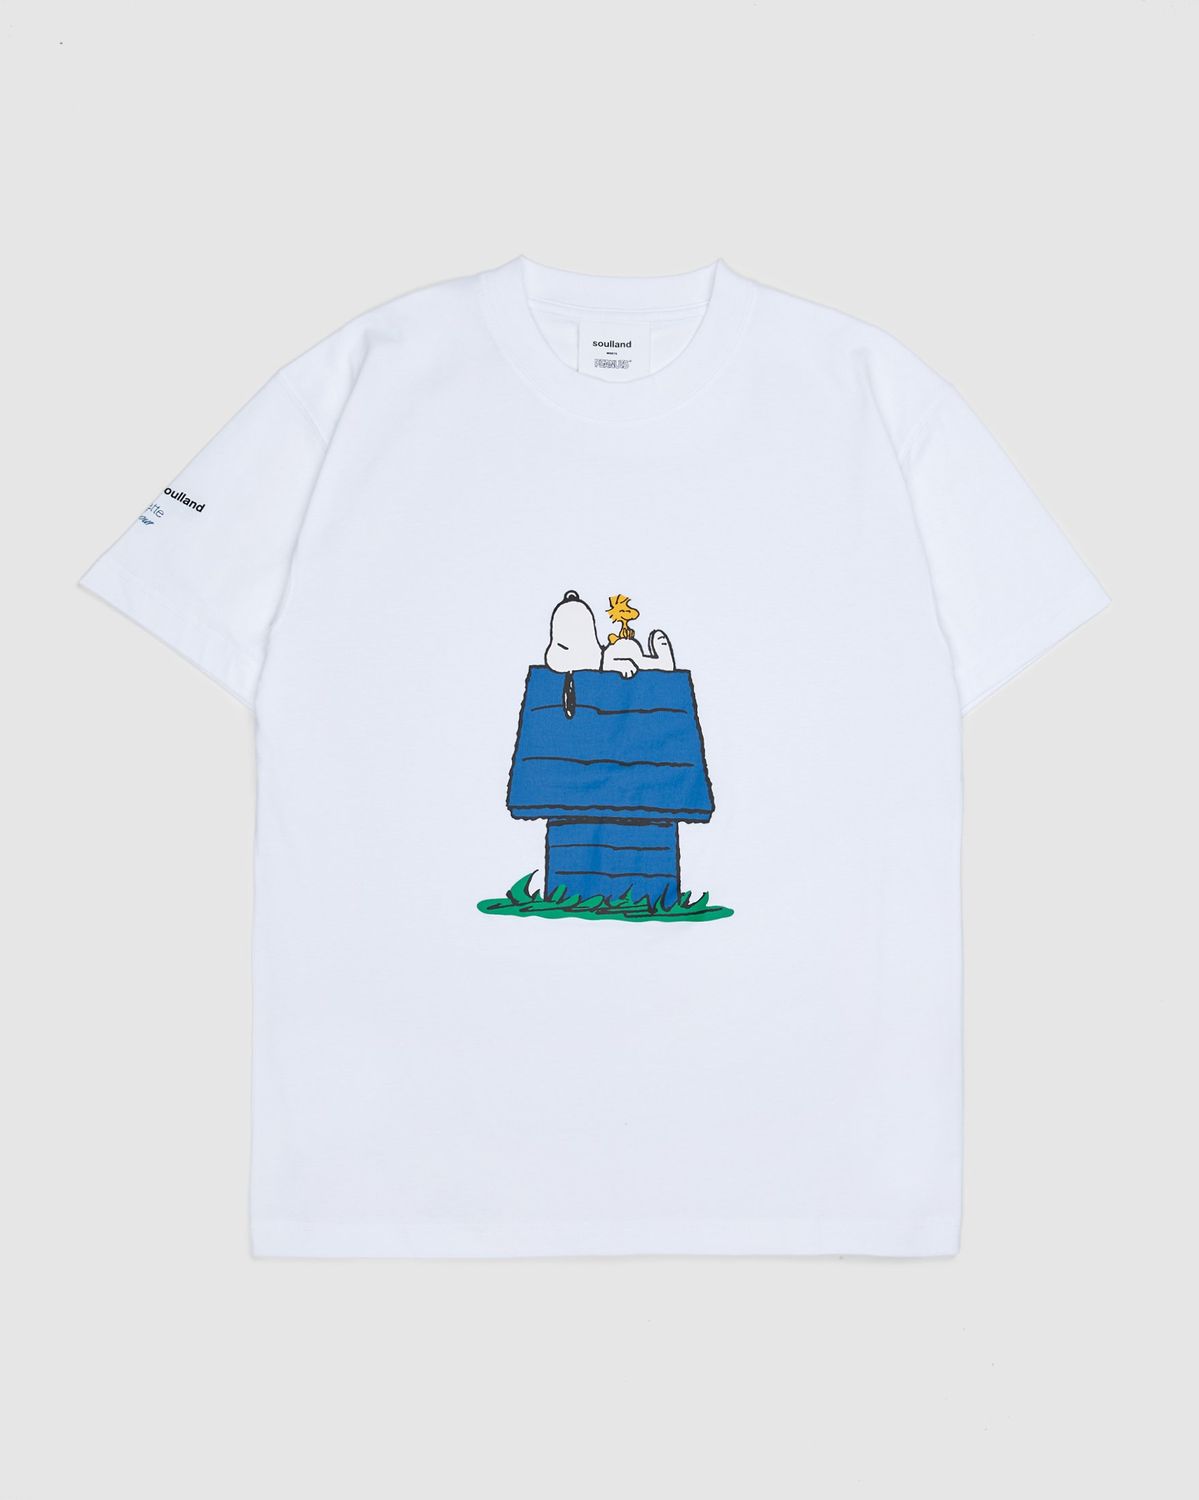 Colette Mon Amour x Soulland – Snoopy Bed White T-Shirt - T-Shirts - White - Image 1